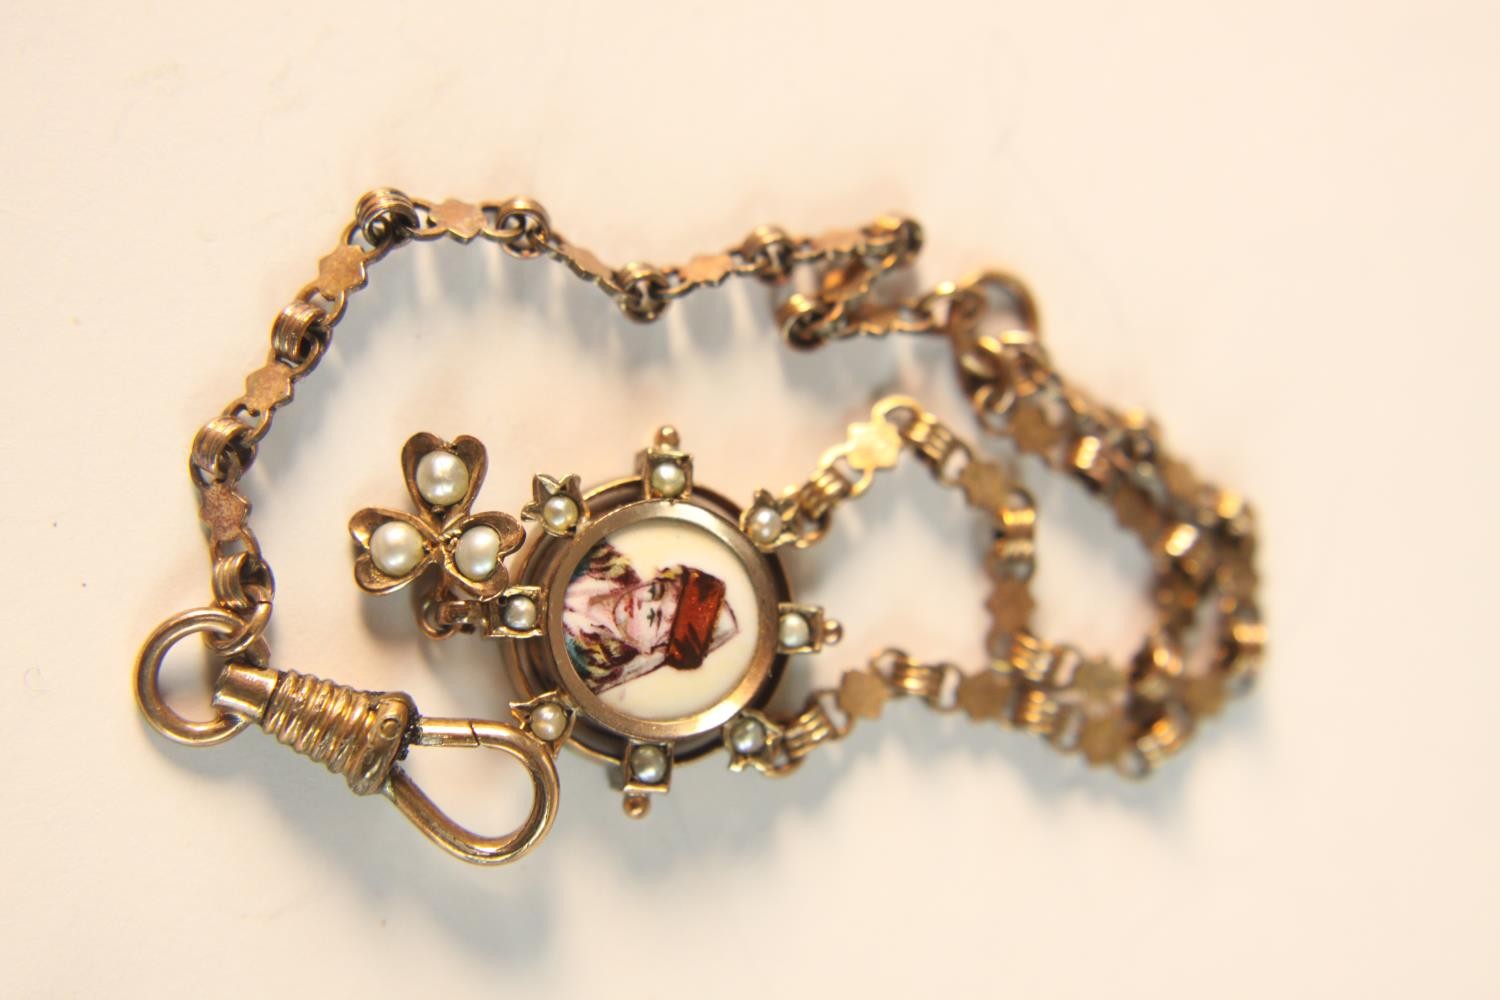 A 19th century rose gold plated watch fob, the end pendant a hand painted portrait on enamel of a - Image 6 of 7